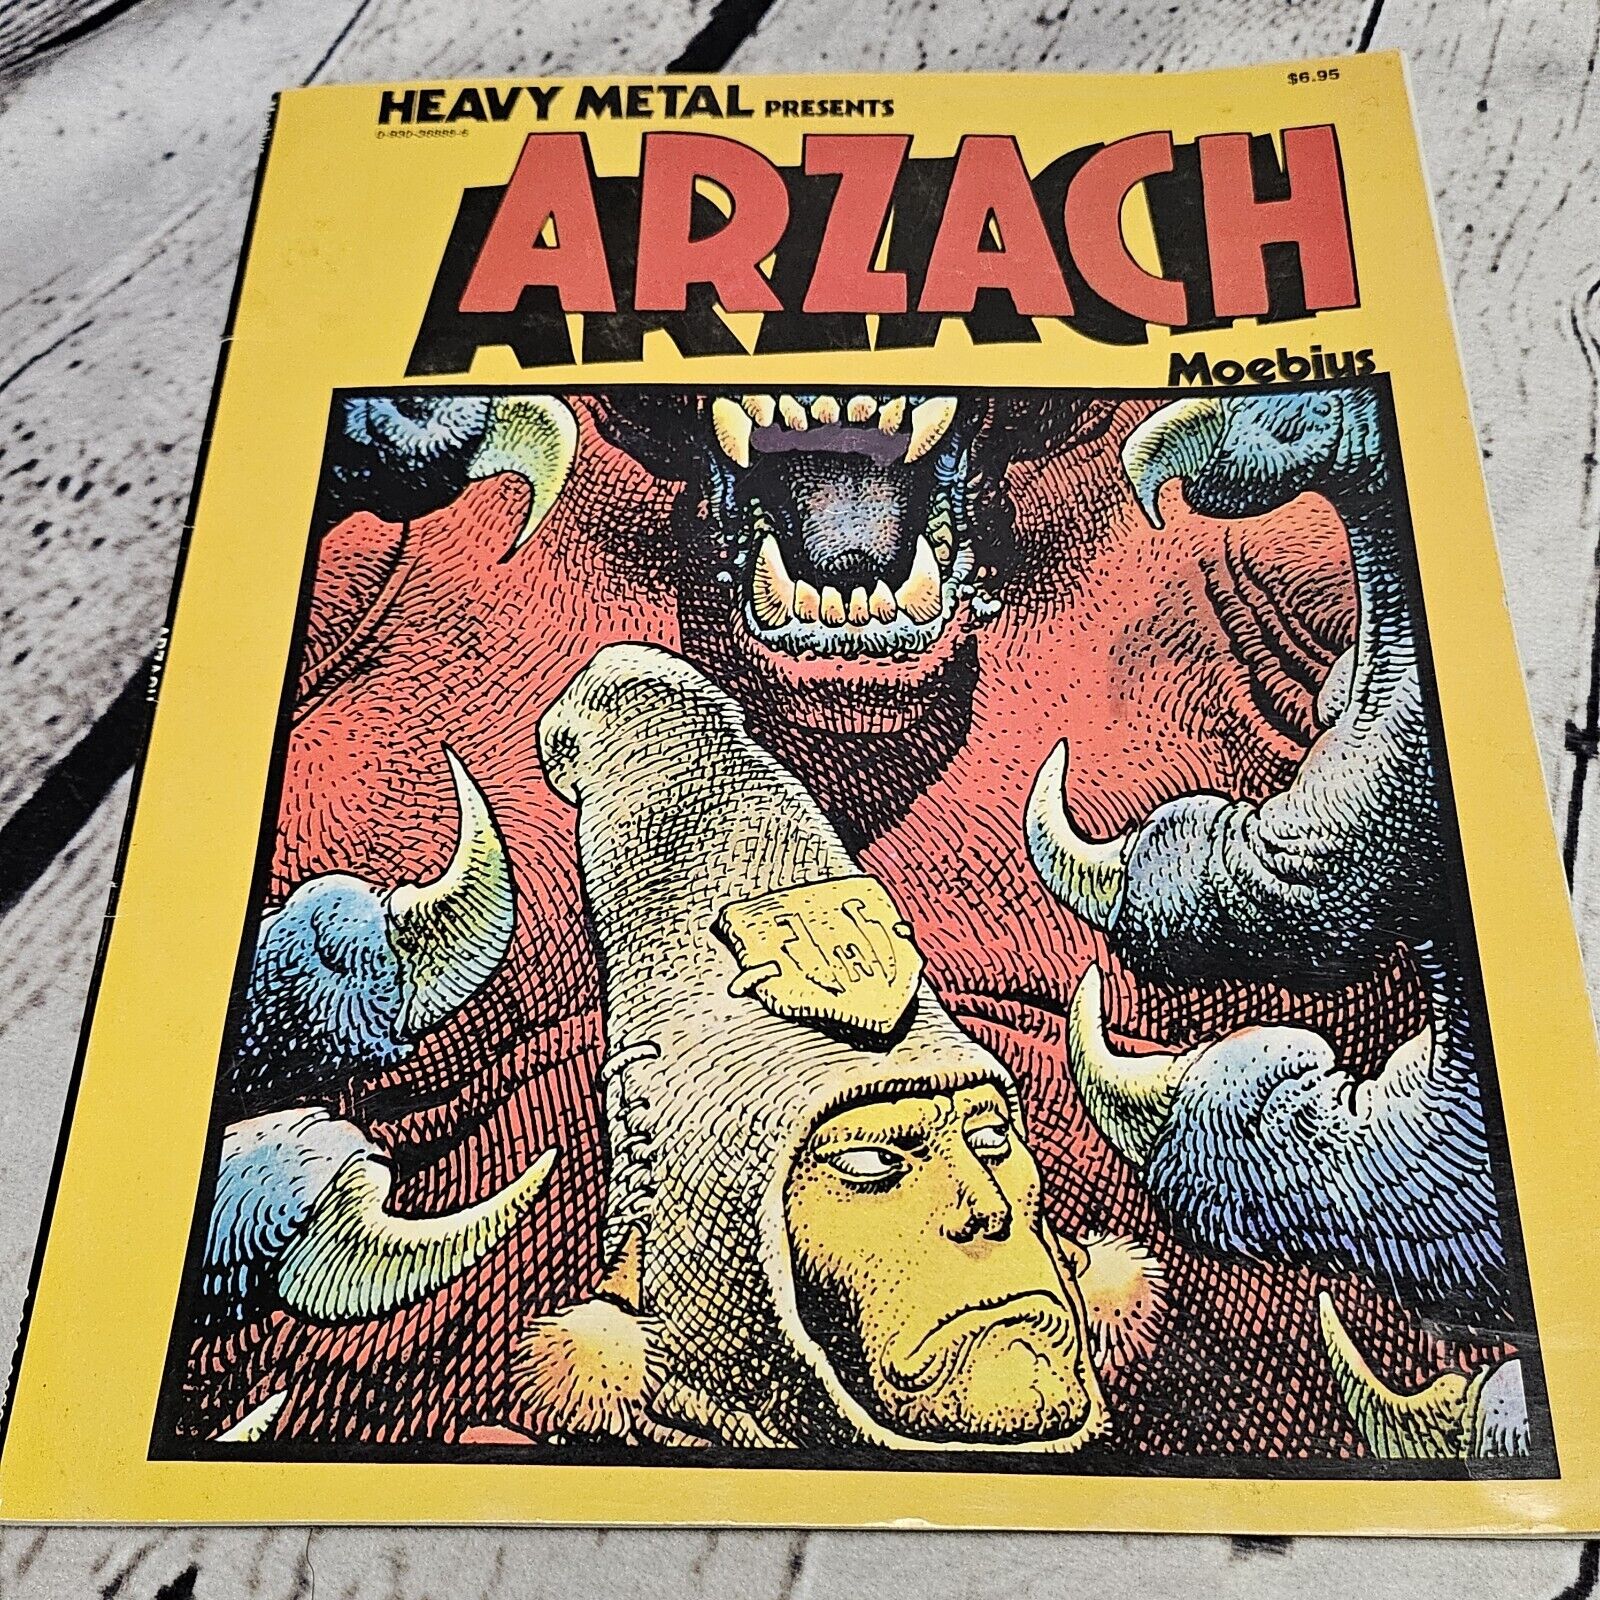 Heavy Metal Presents Arzach by Moebius 1977 1st Edition VTG Softcover 64pp FN+